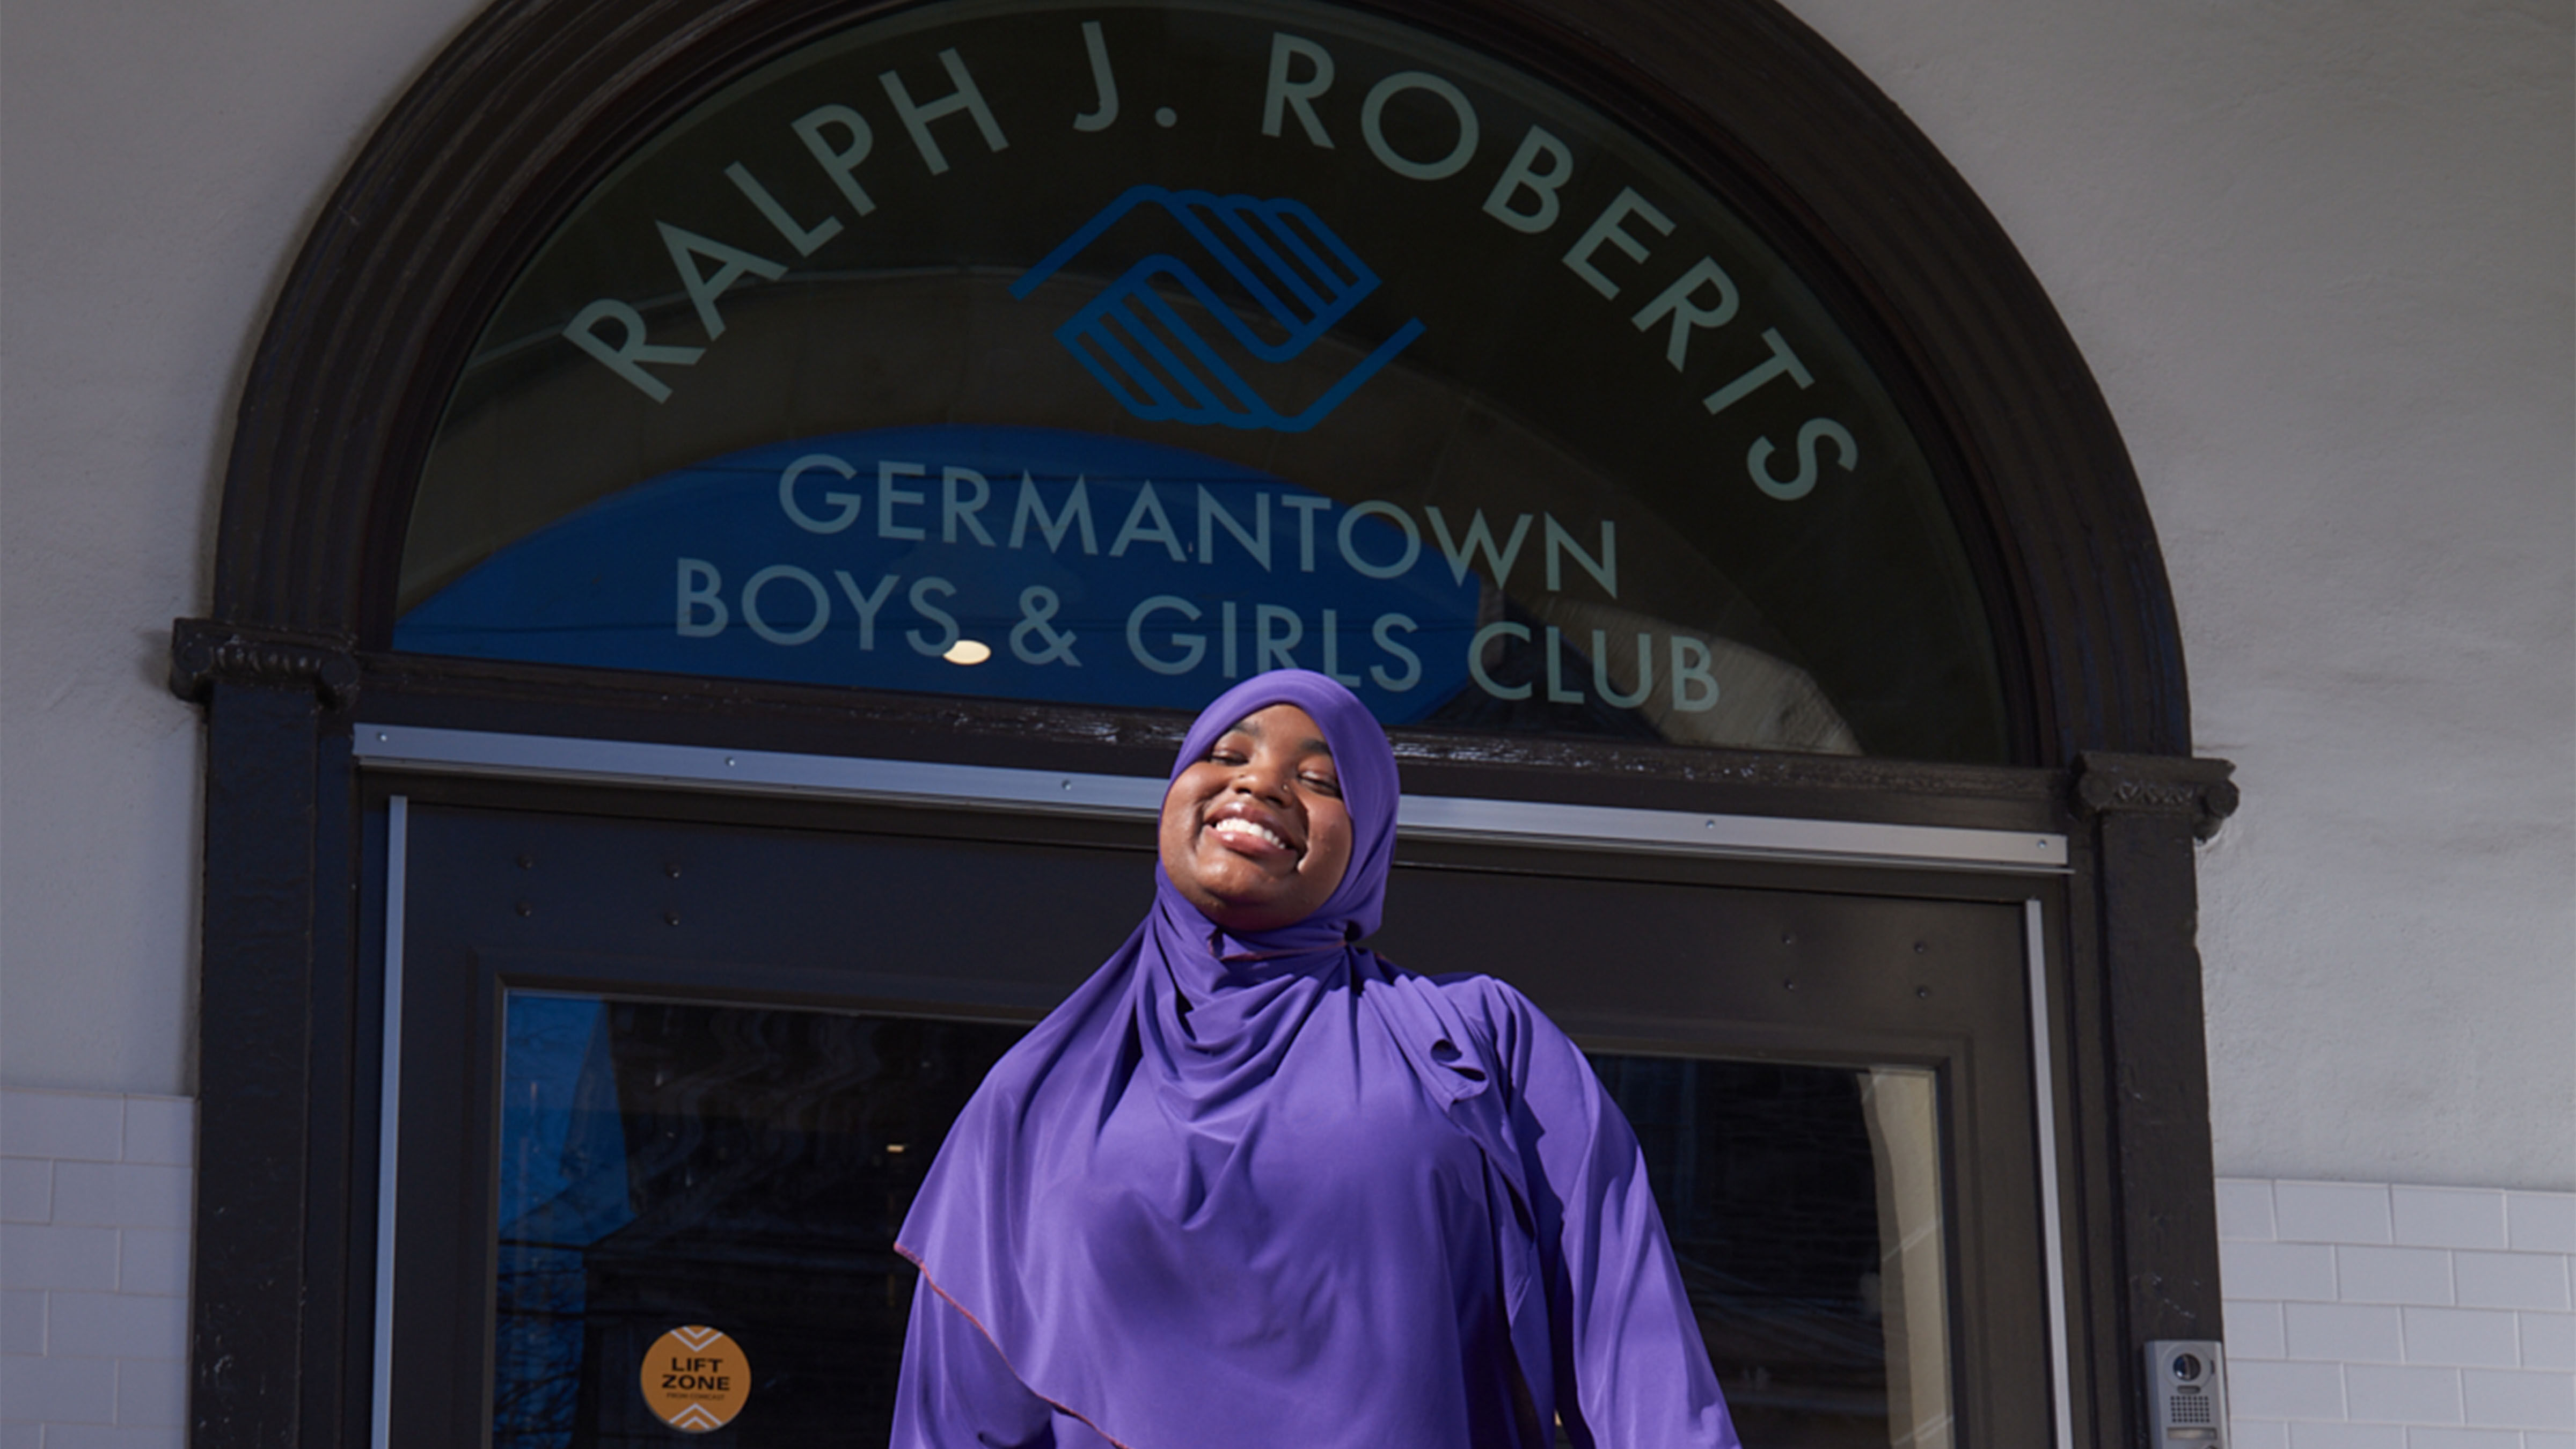 A student standing in front of the Ralph J. Roberts Germantown Boys & Girls Club.